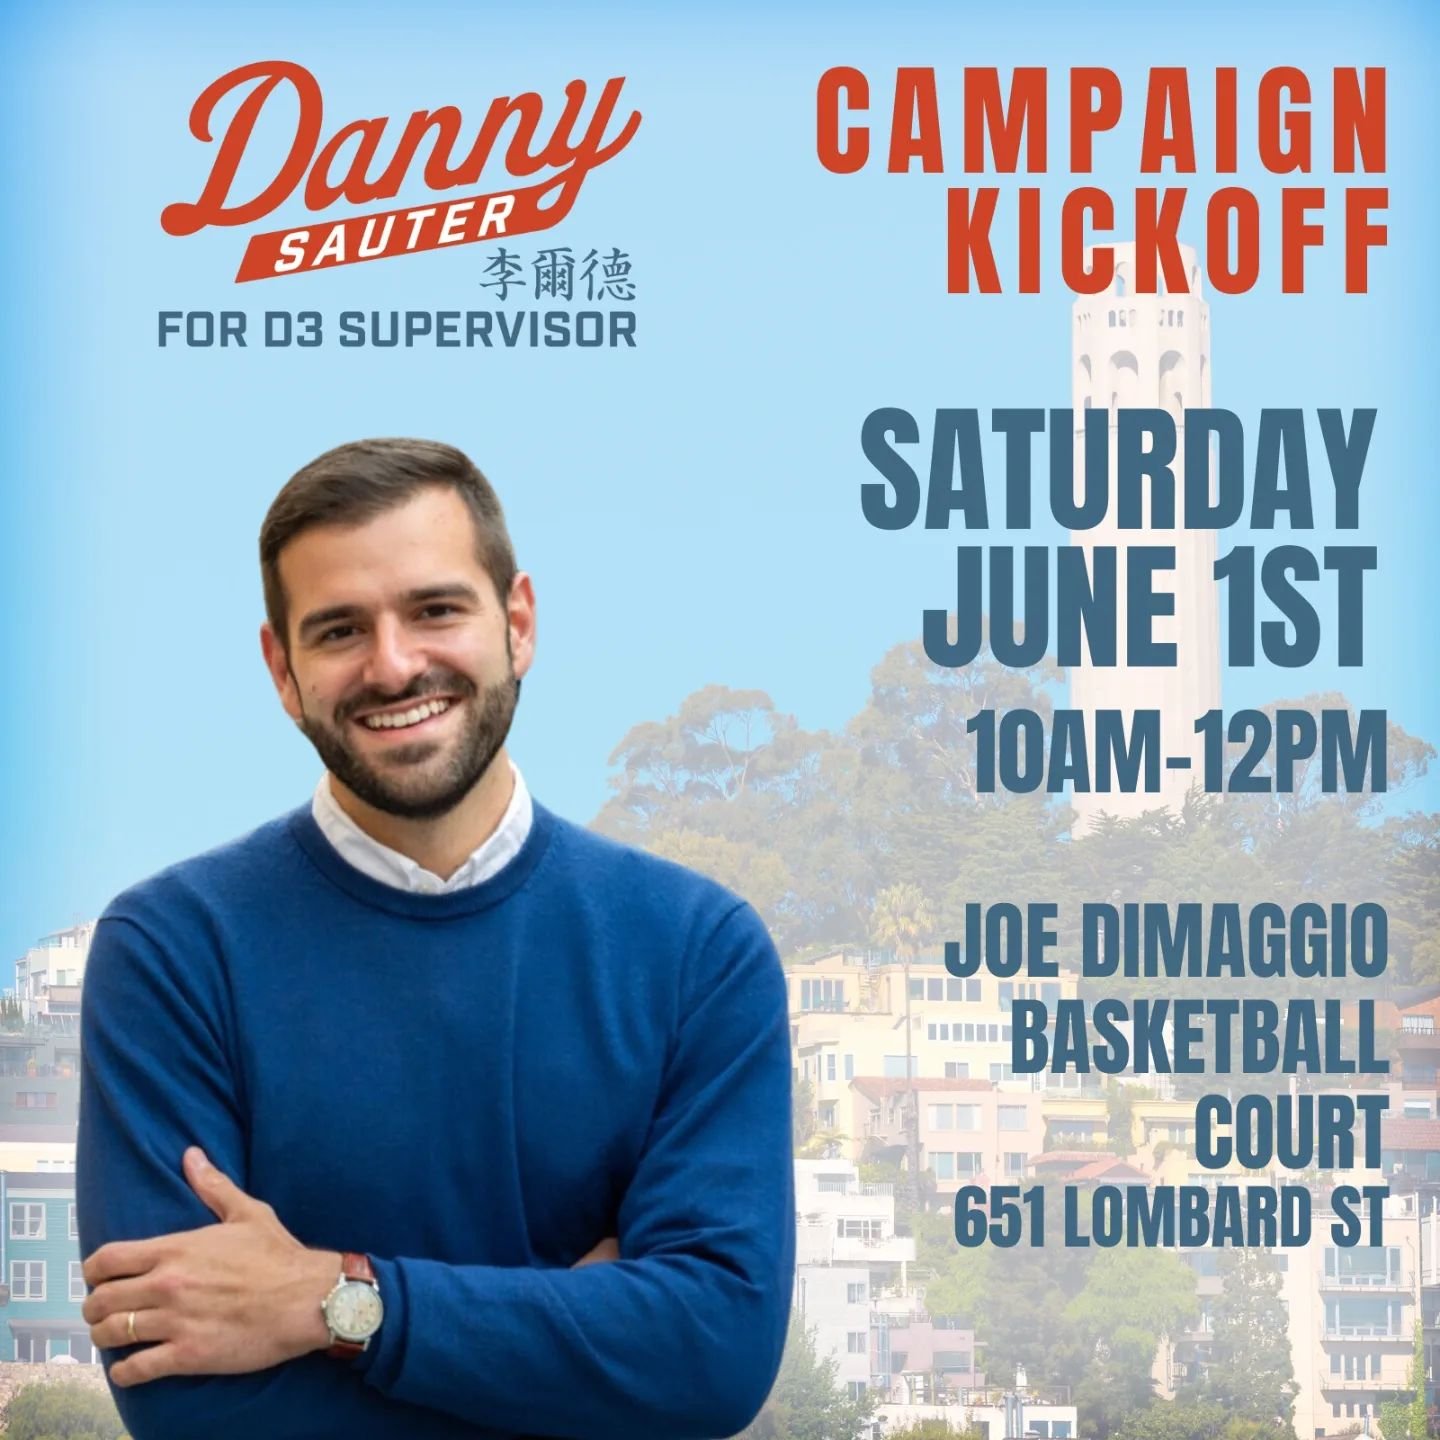 You're invited to our Campaign Kickoff! 🎉

We've been hard at work for months now, but it's time to really like this into high gear. 

Saturday, June 1st in North Beach. Join your neighbors, enjoy coffee and pastries, and hear from guest speakers as